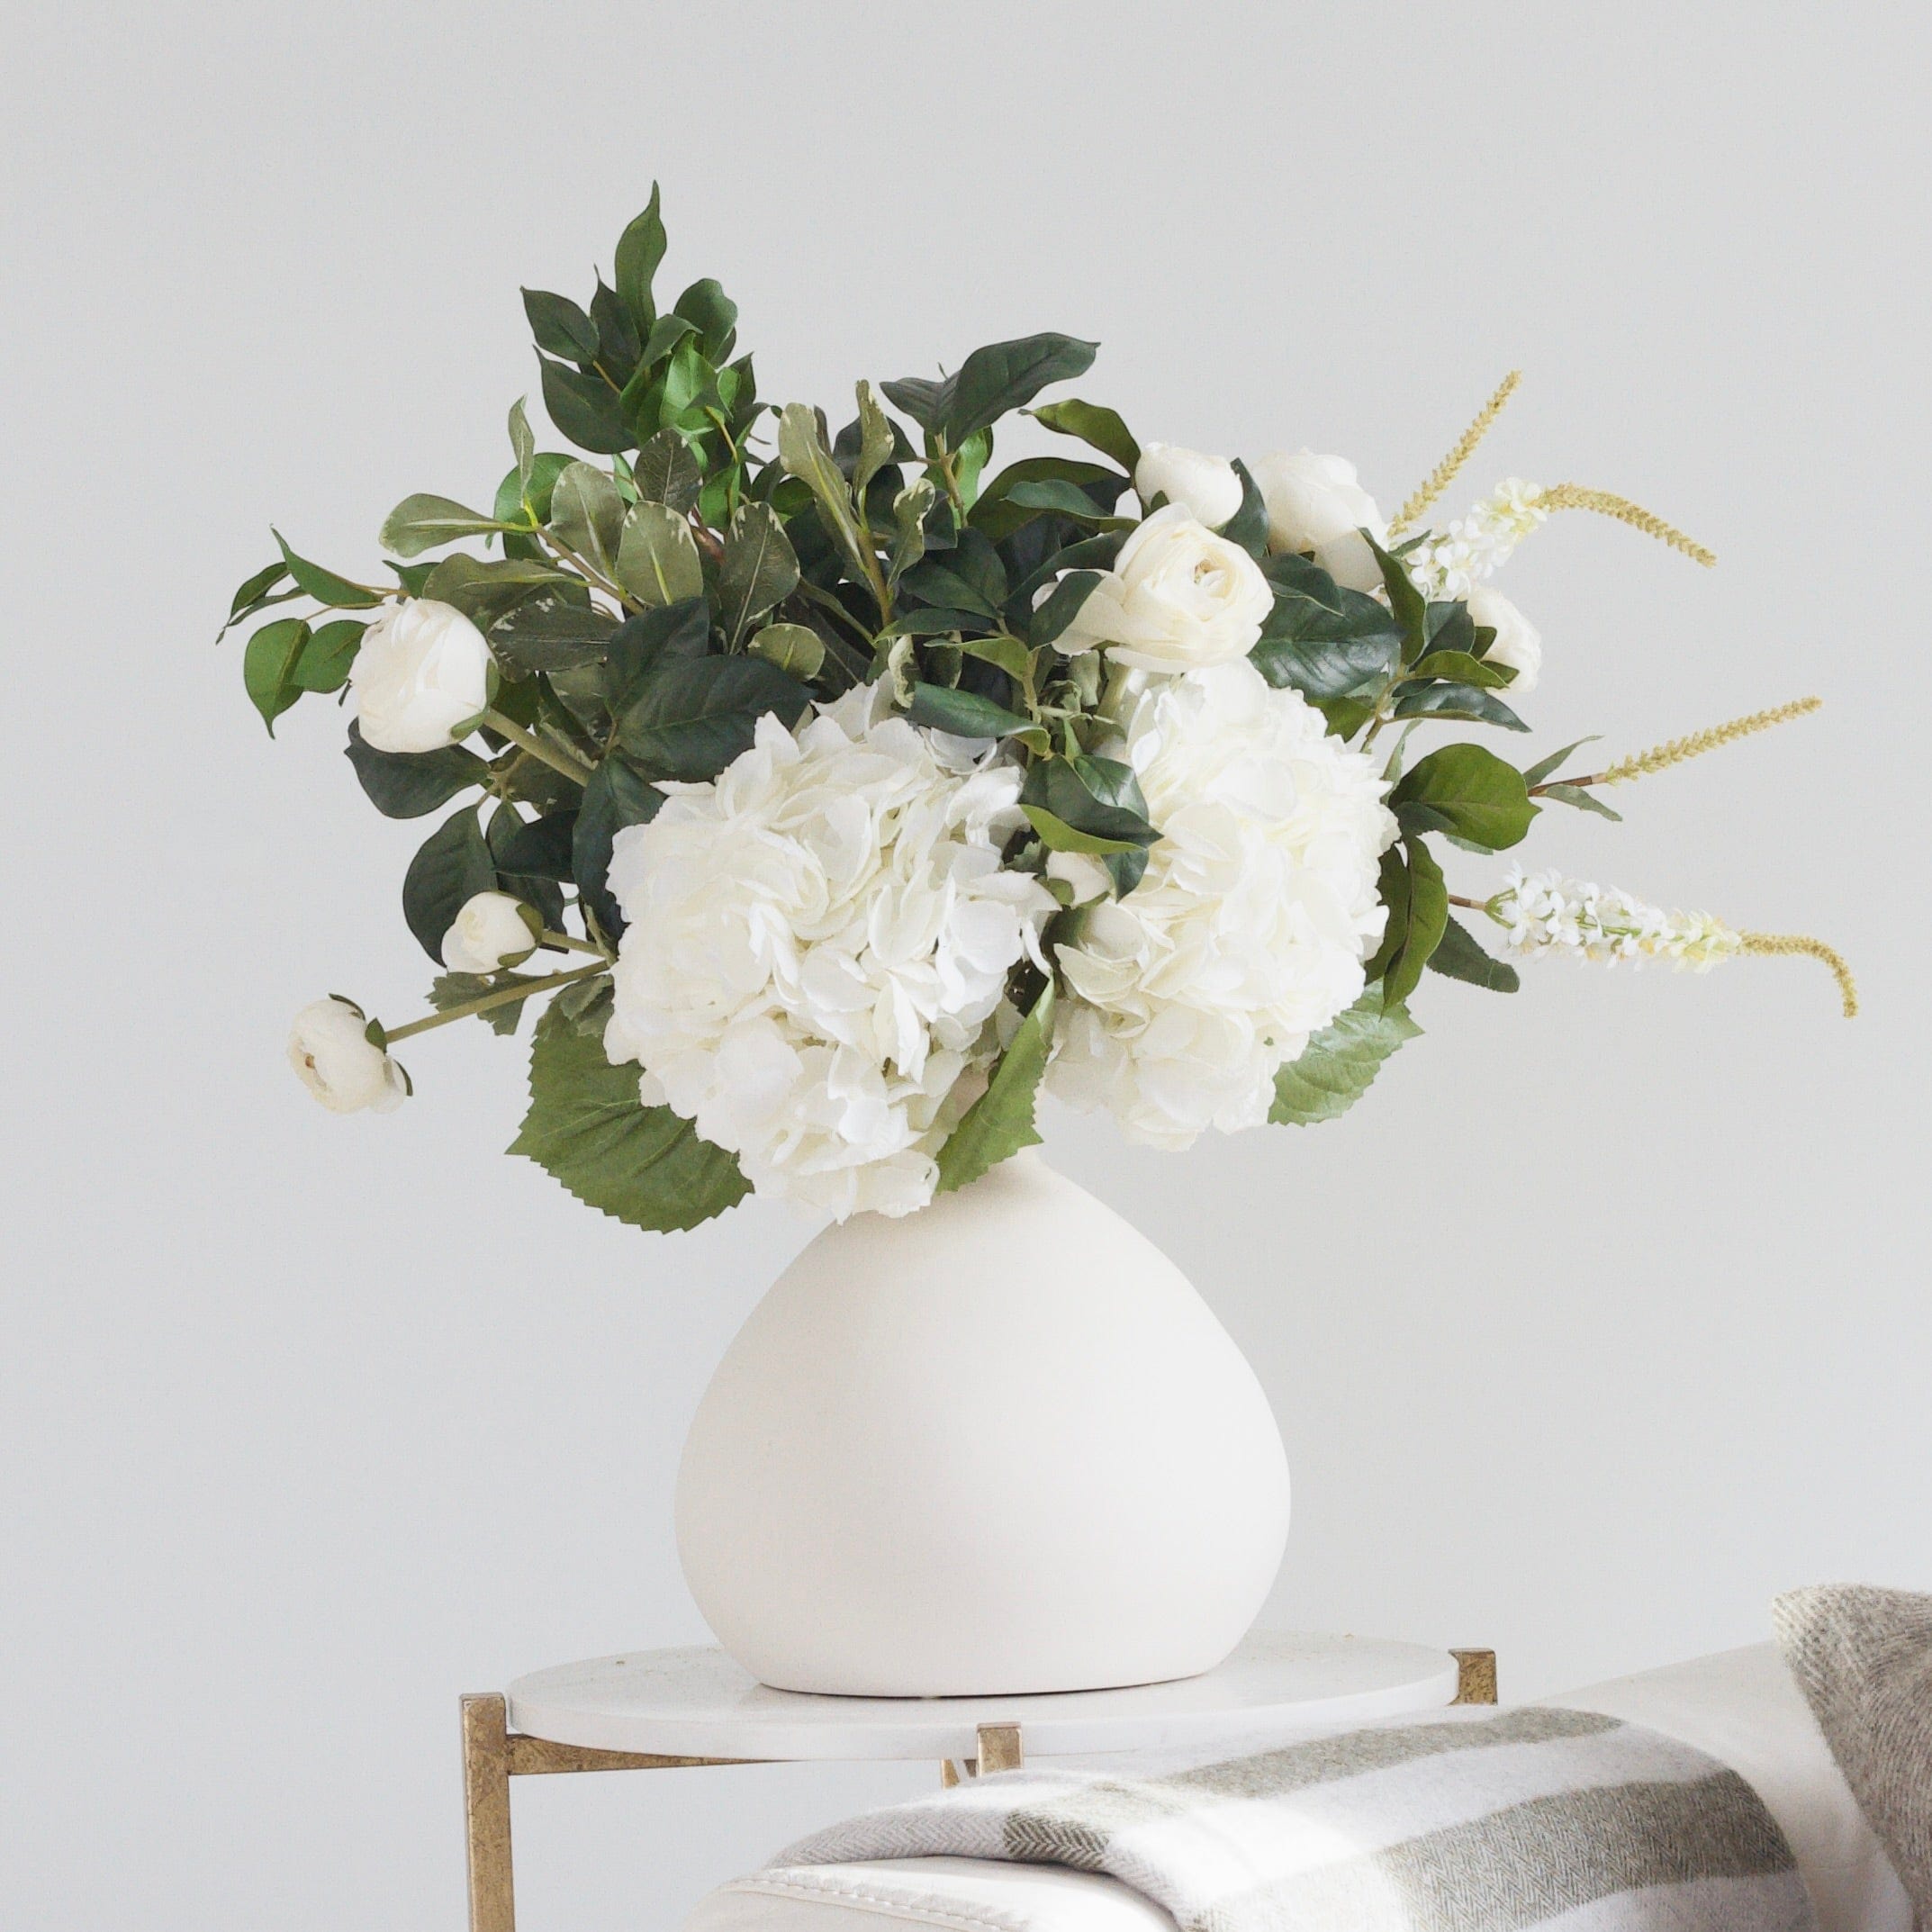 Luxury Lifelike Realistic Artificial Fabric Silk Blooms with Foliage Buy Online from The Faux Flower Company | Evergreen Arrangement in Burford Vase ABP1747